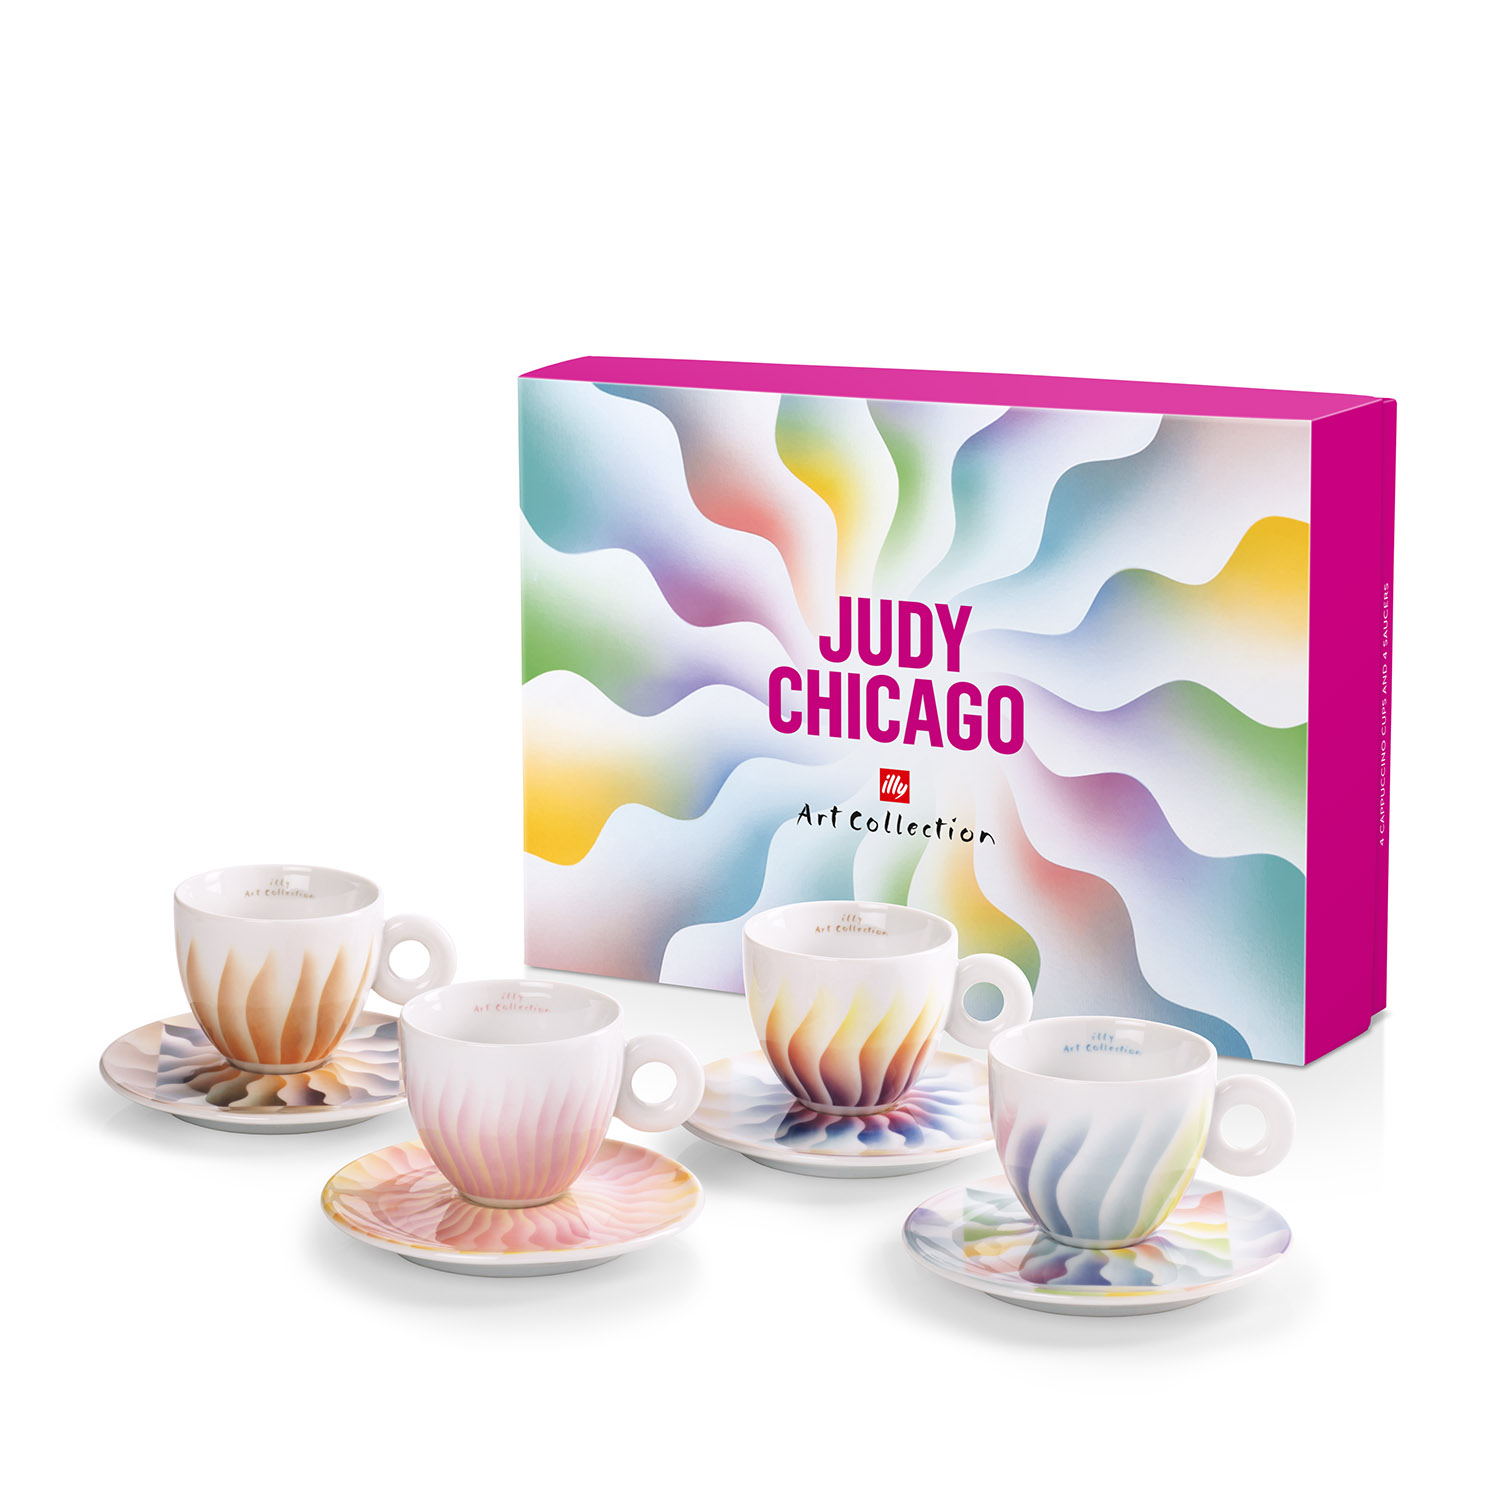 Set of 4 Cappuccino Cups - the Judy Chicago illy Art Collection